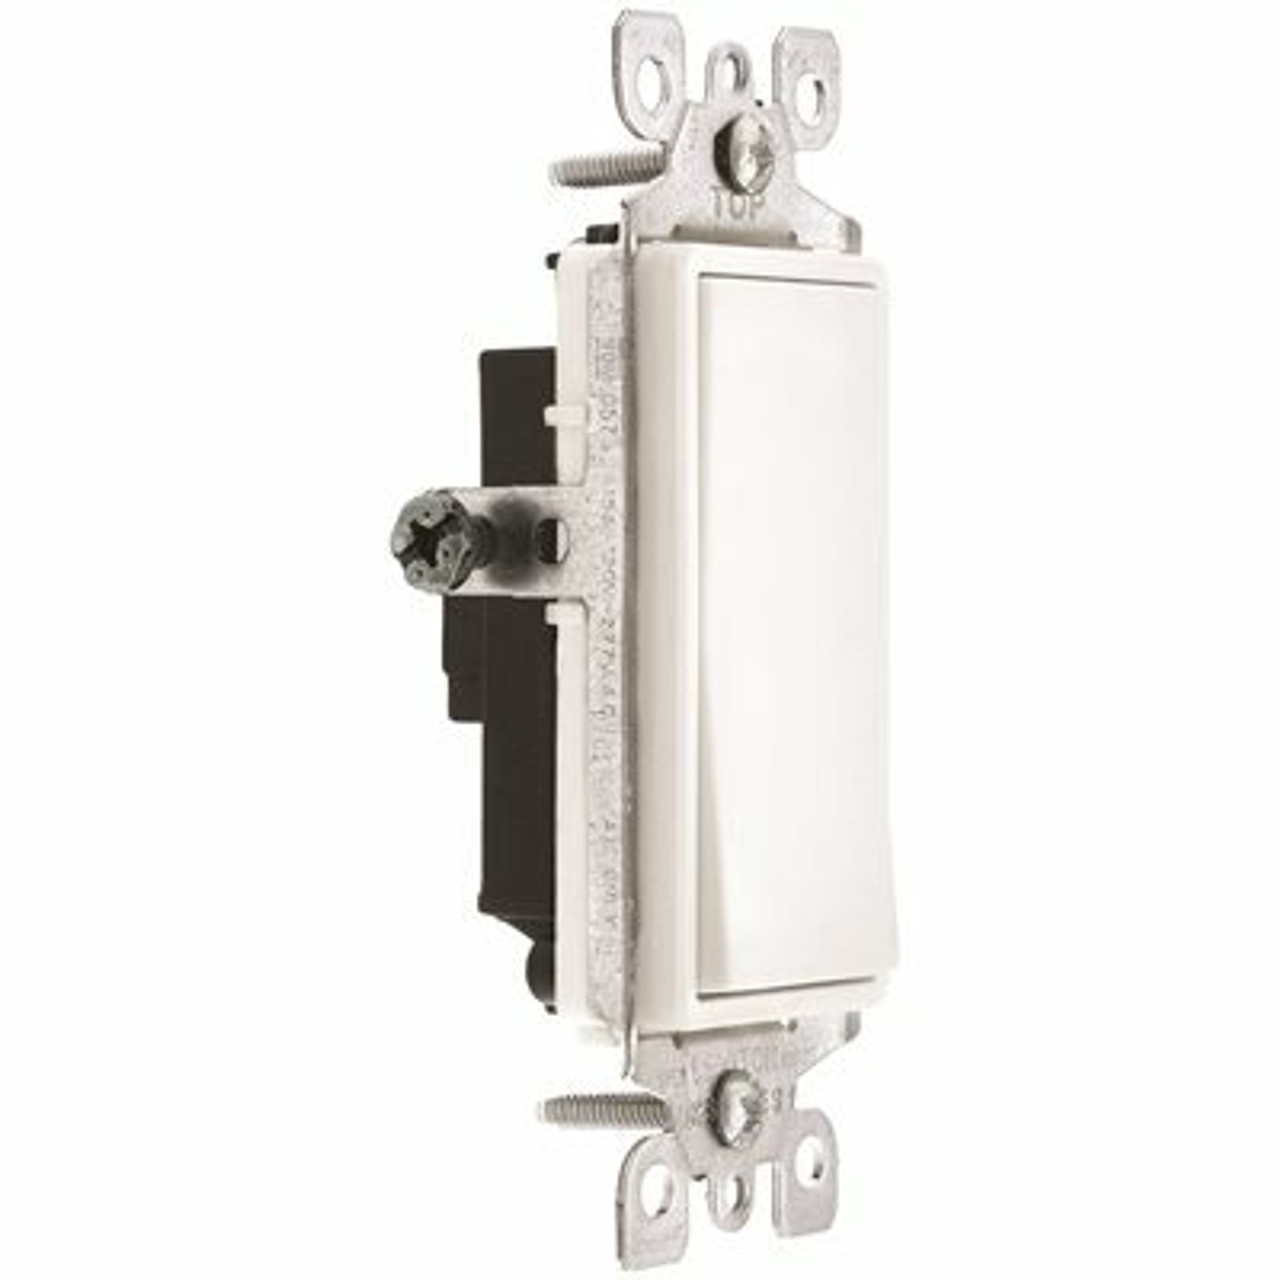 Leviton Decora 15 Amp Grounding Rocker Light Switch With Quickwire, White